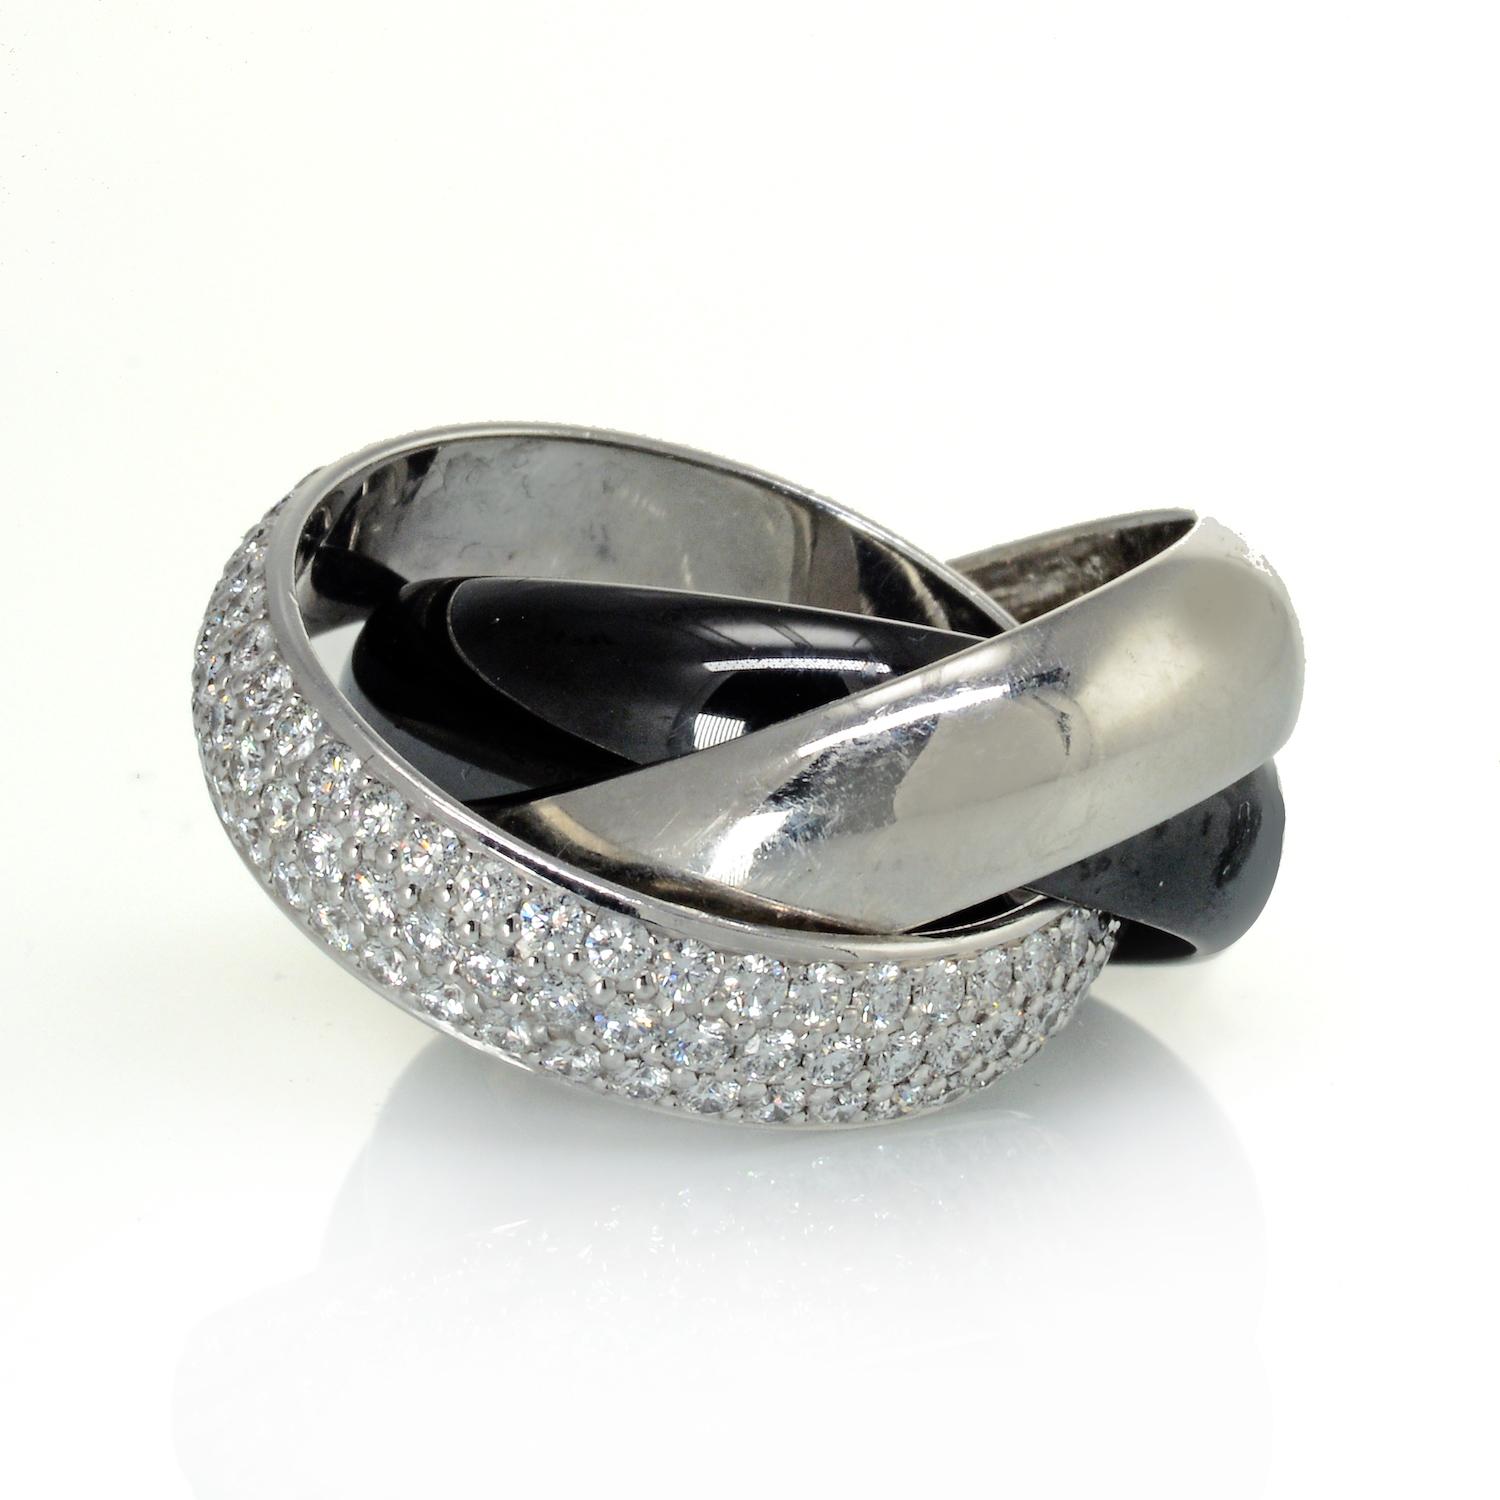 Trinity platinum Cartier ring with black ceramic and diamonds. 

METAL: platinum and ceramic
GEMSTONE(S): round brilliant-cut diamonds approx. 1.85 carats total, most F-G/VS
MEASUREMENTS: 1/2 inch at the widest section
RING SIZE: 5, Cartier size